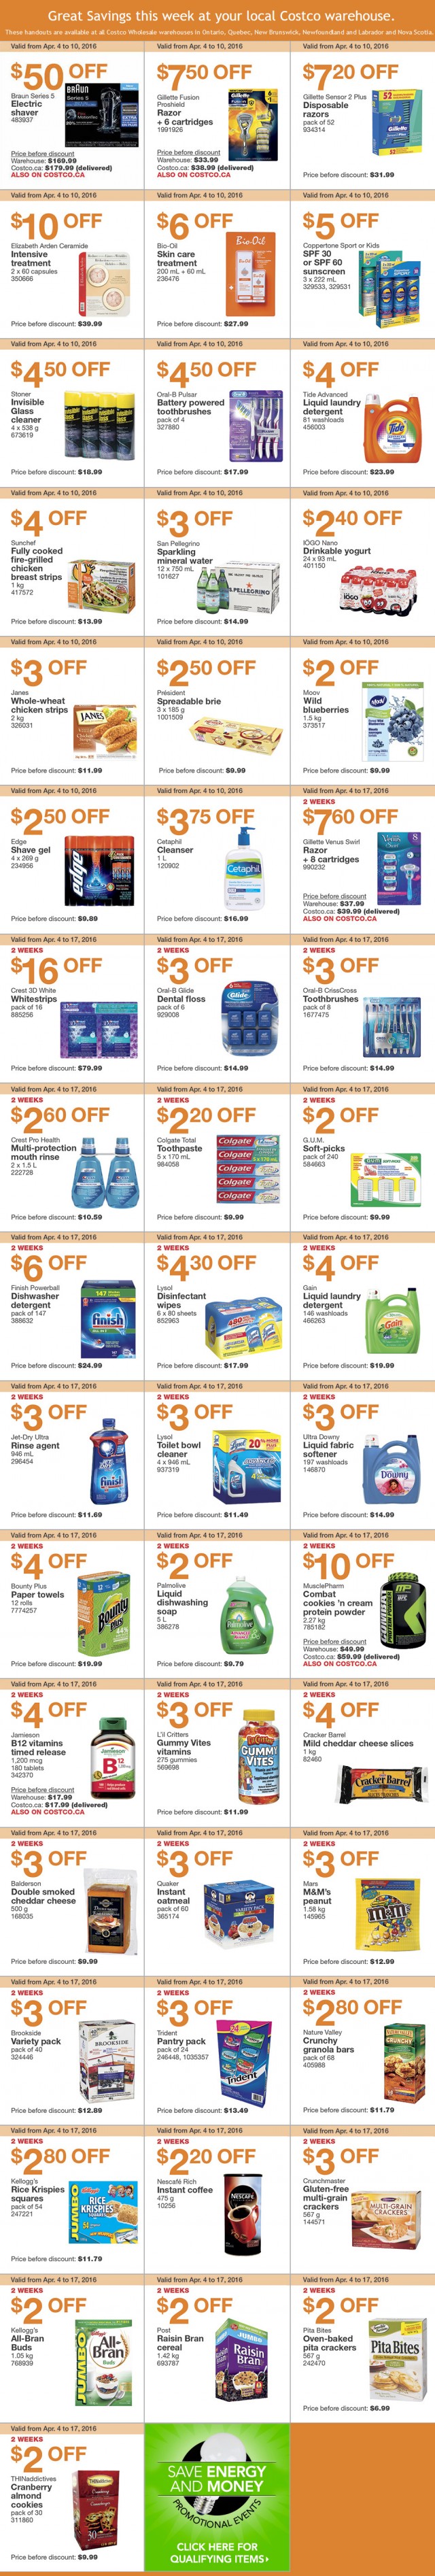 Costco Warehouse Coupons April 4th 10th — Deals from SaveaLoonie!